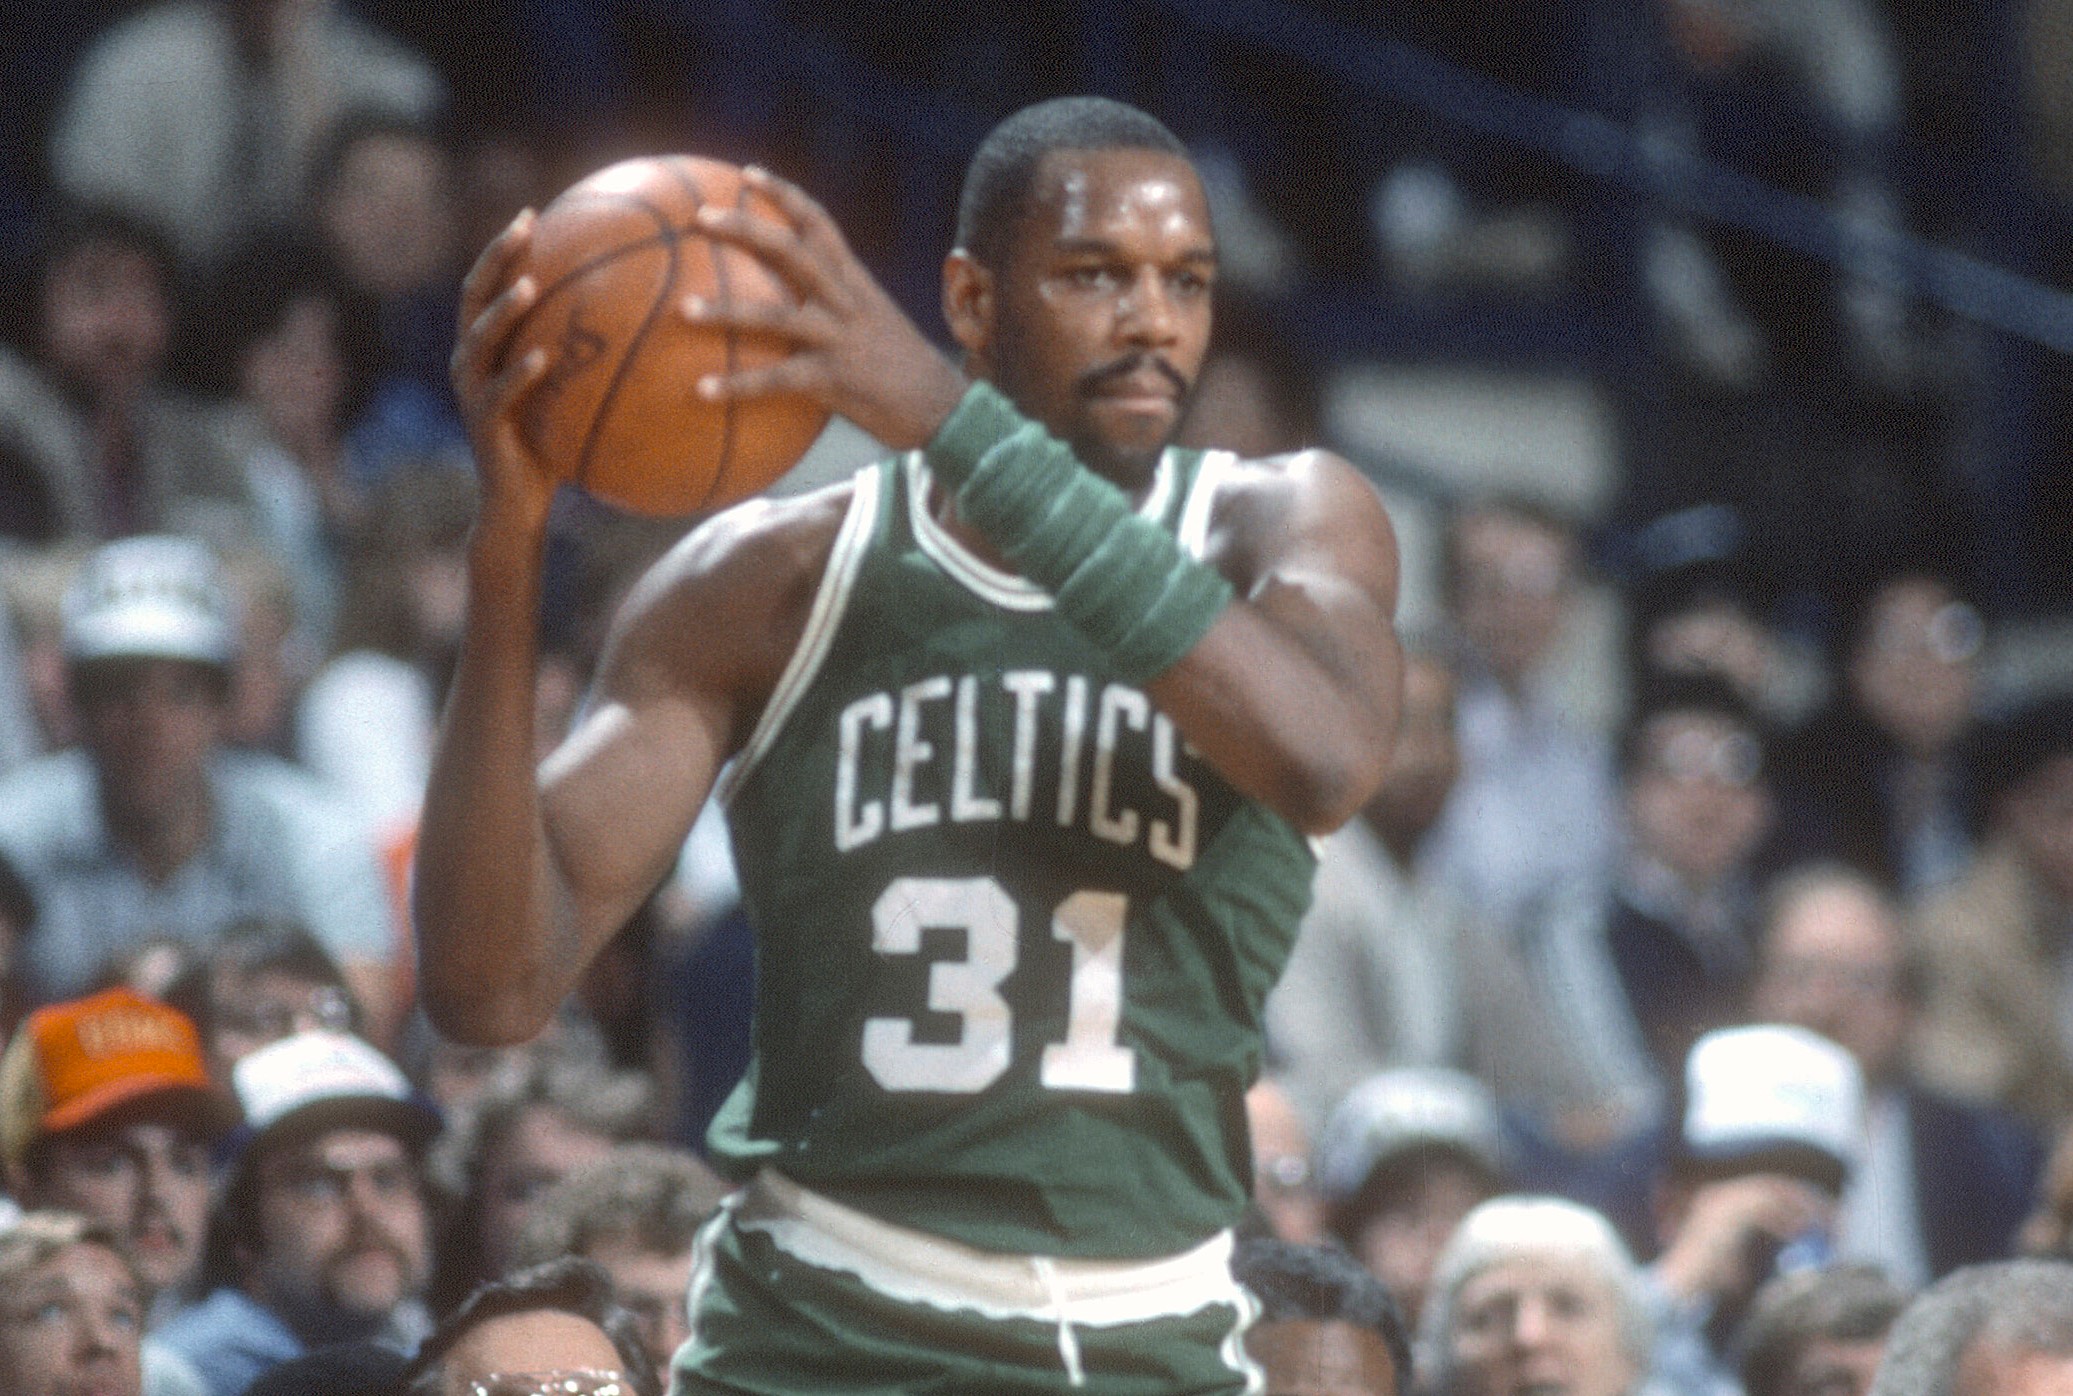 Cedric Maxwell of the Boston Celtics in action against the Washington Bullets.